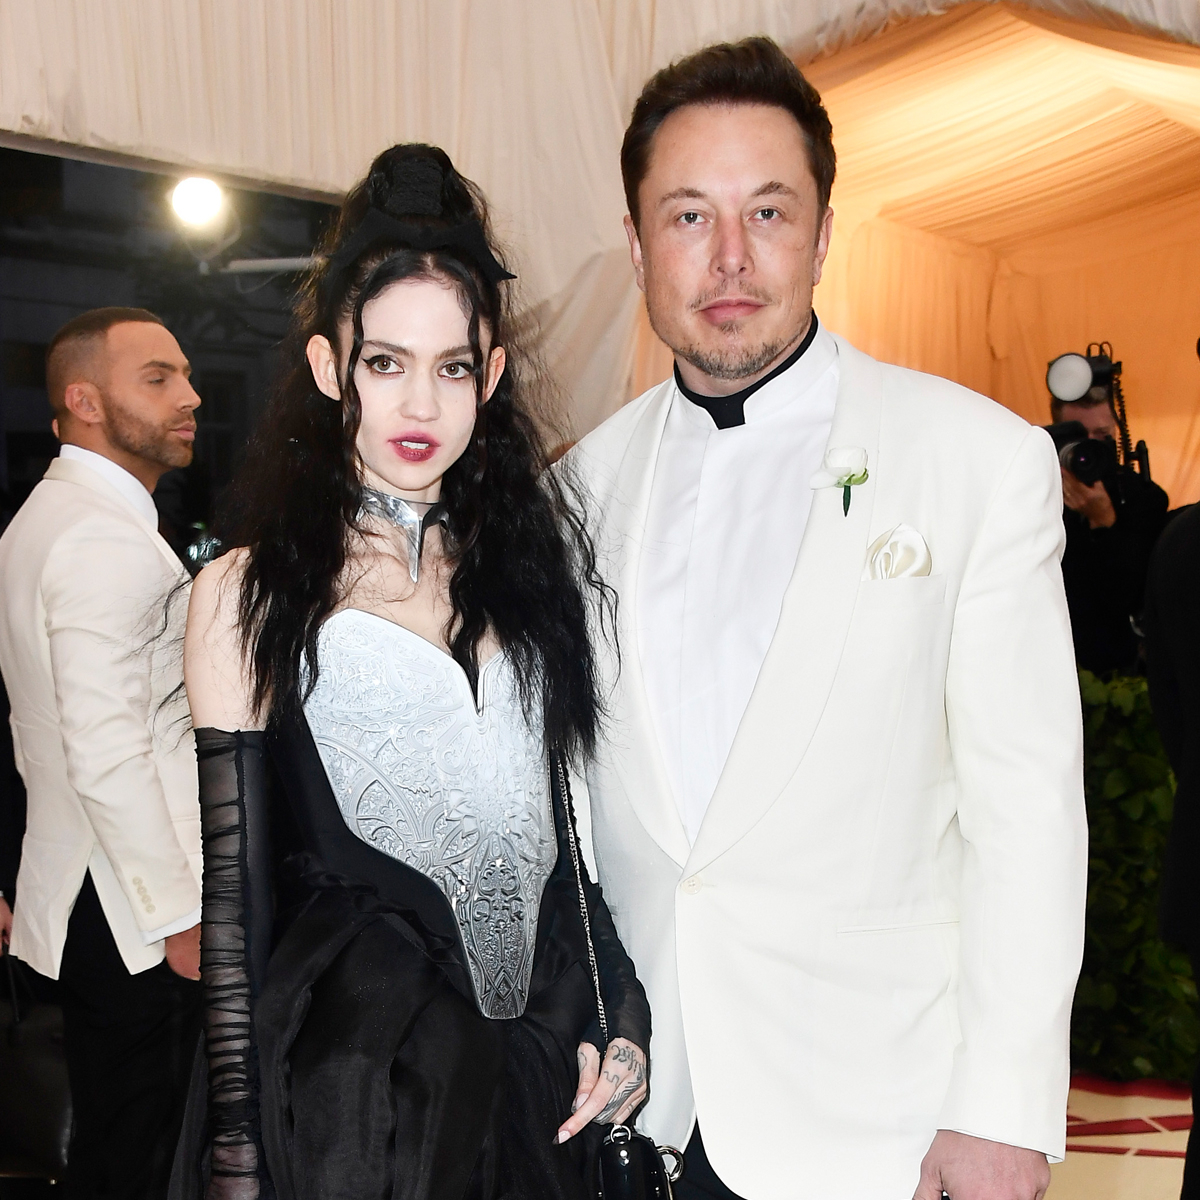 Elon Musk shares a new family photo of his son and Grimes, X Æ A-Xii